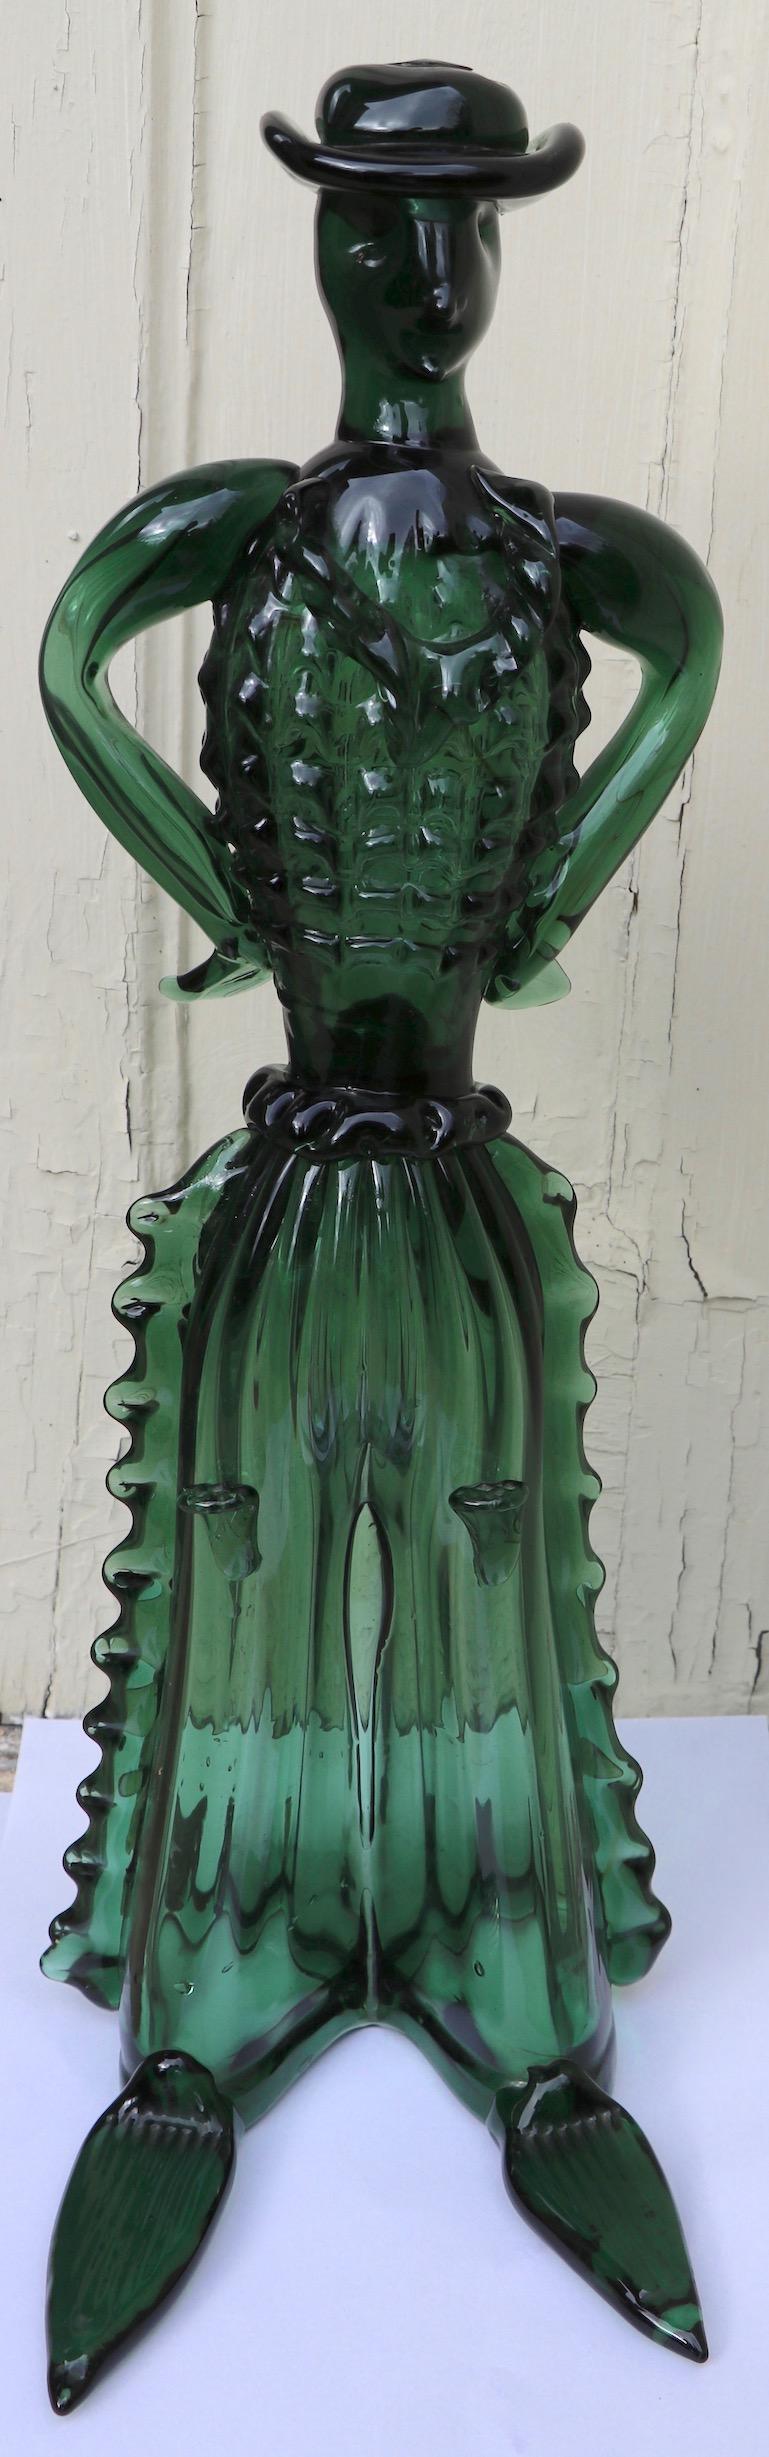 Italian made figure of Spanish cowboy in emerald glass, attributed to Barovier Seguso Farro, unsigned. In perfect condition, free of chips, cracks, damage or repairs. Playful example of midcentury Murano glass, well executed with difficult